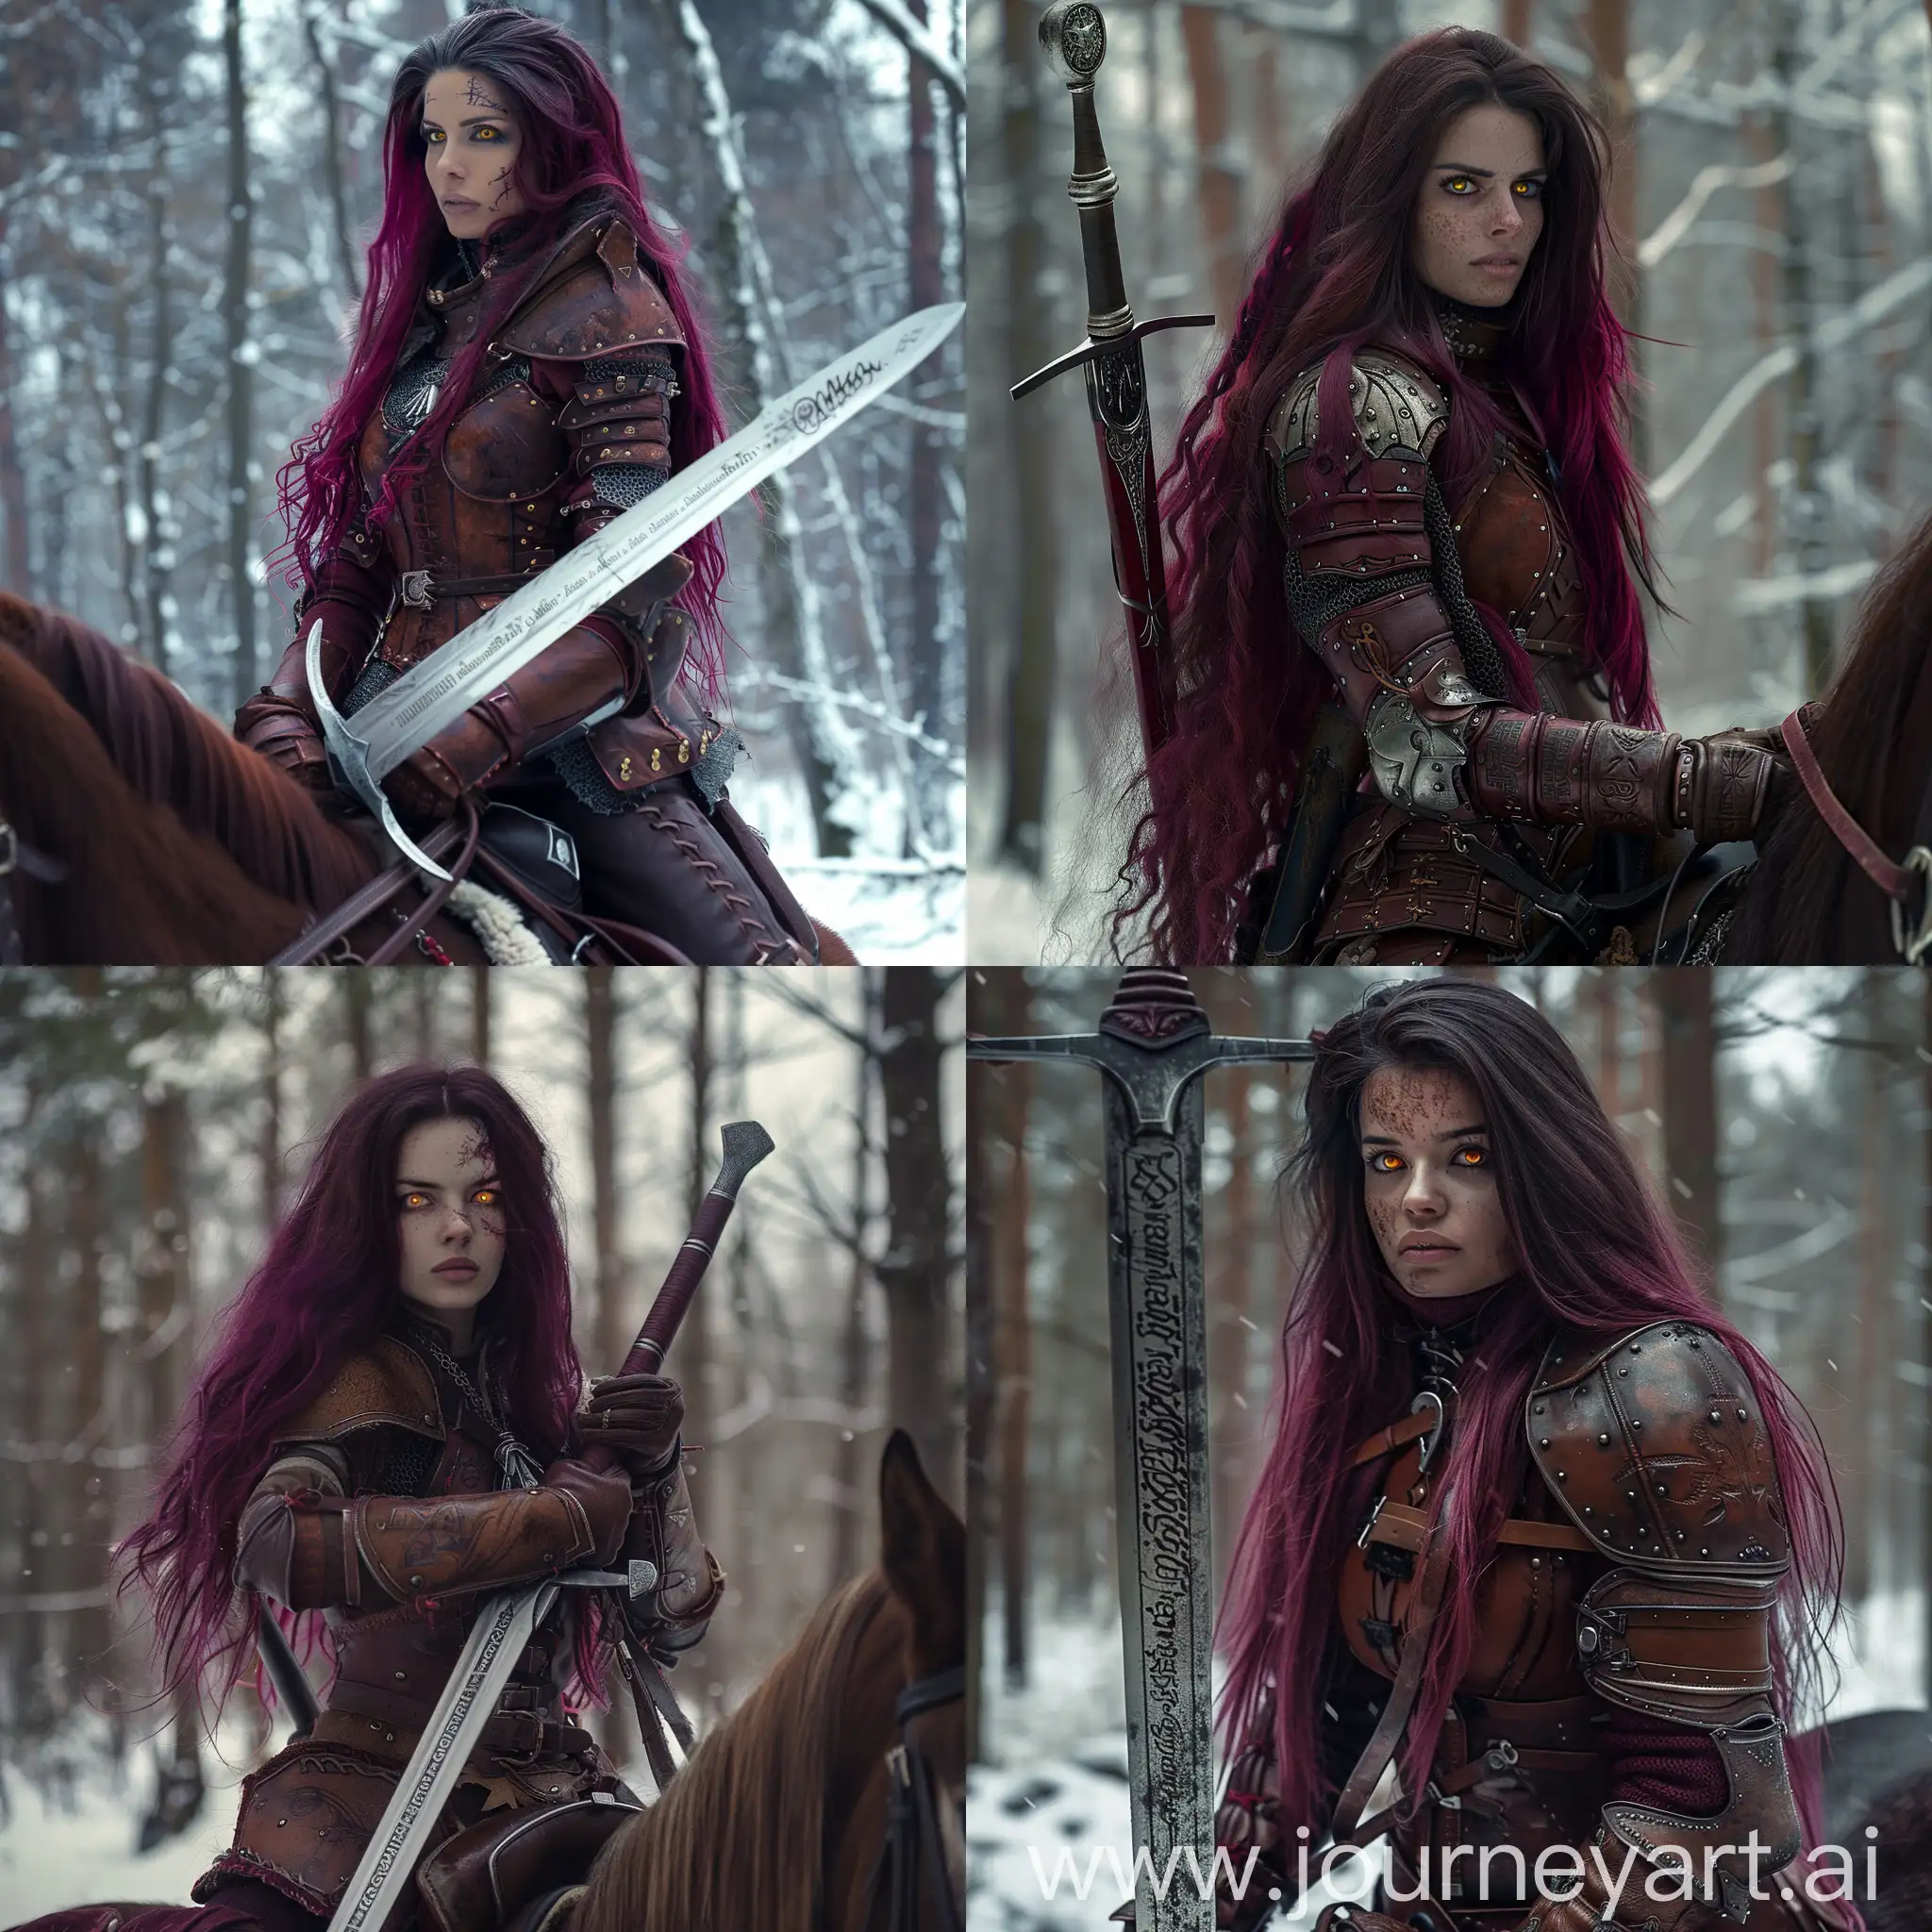 a photographic image of an intimidating woman witcher with dark pink long hair and honey cat eyes. She is tall, strong and with little scars.She is riding a horse. She is 29 years old ferocious soldier dressing in medieval armour red and brown colours holding a long silver sword with inscriptions. As photographed by Josselin Cornillon-Maillard in a winter forest background